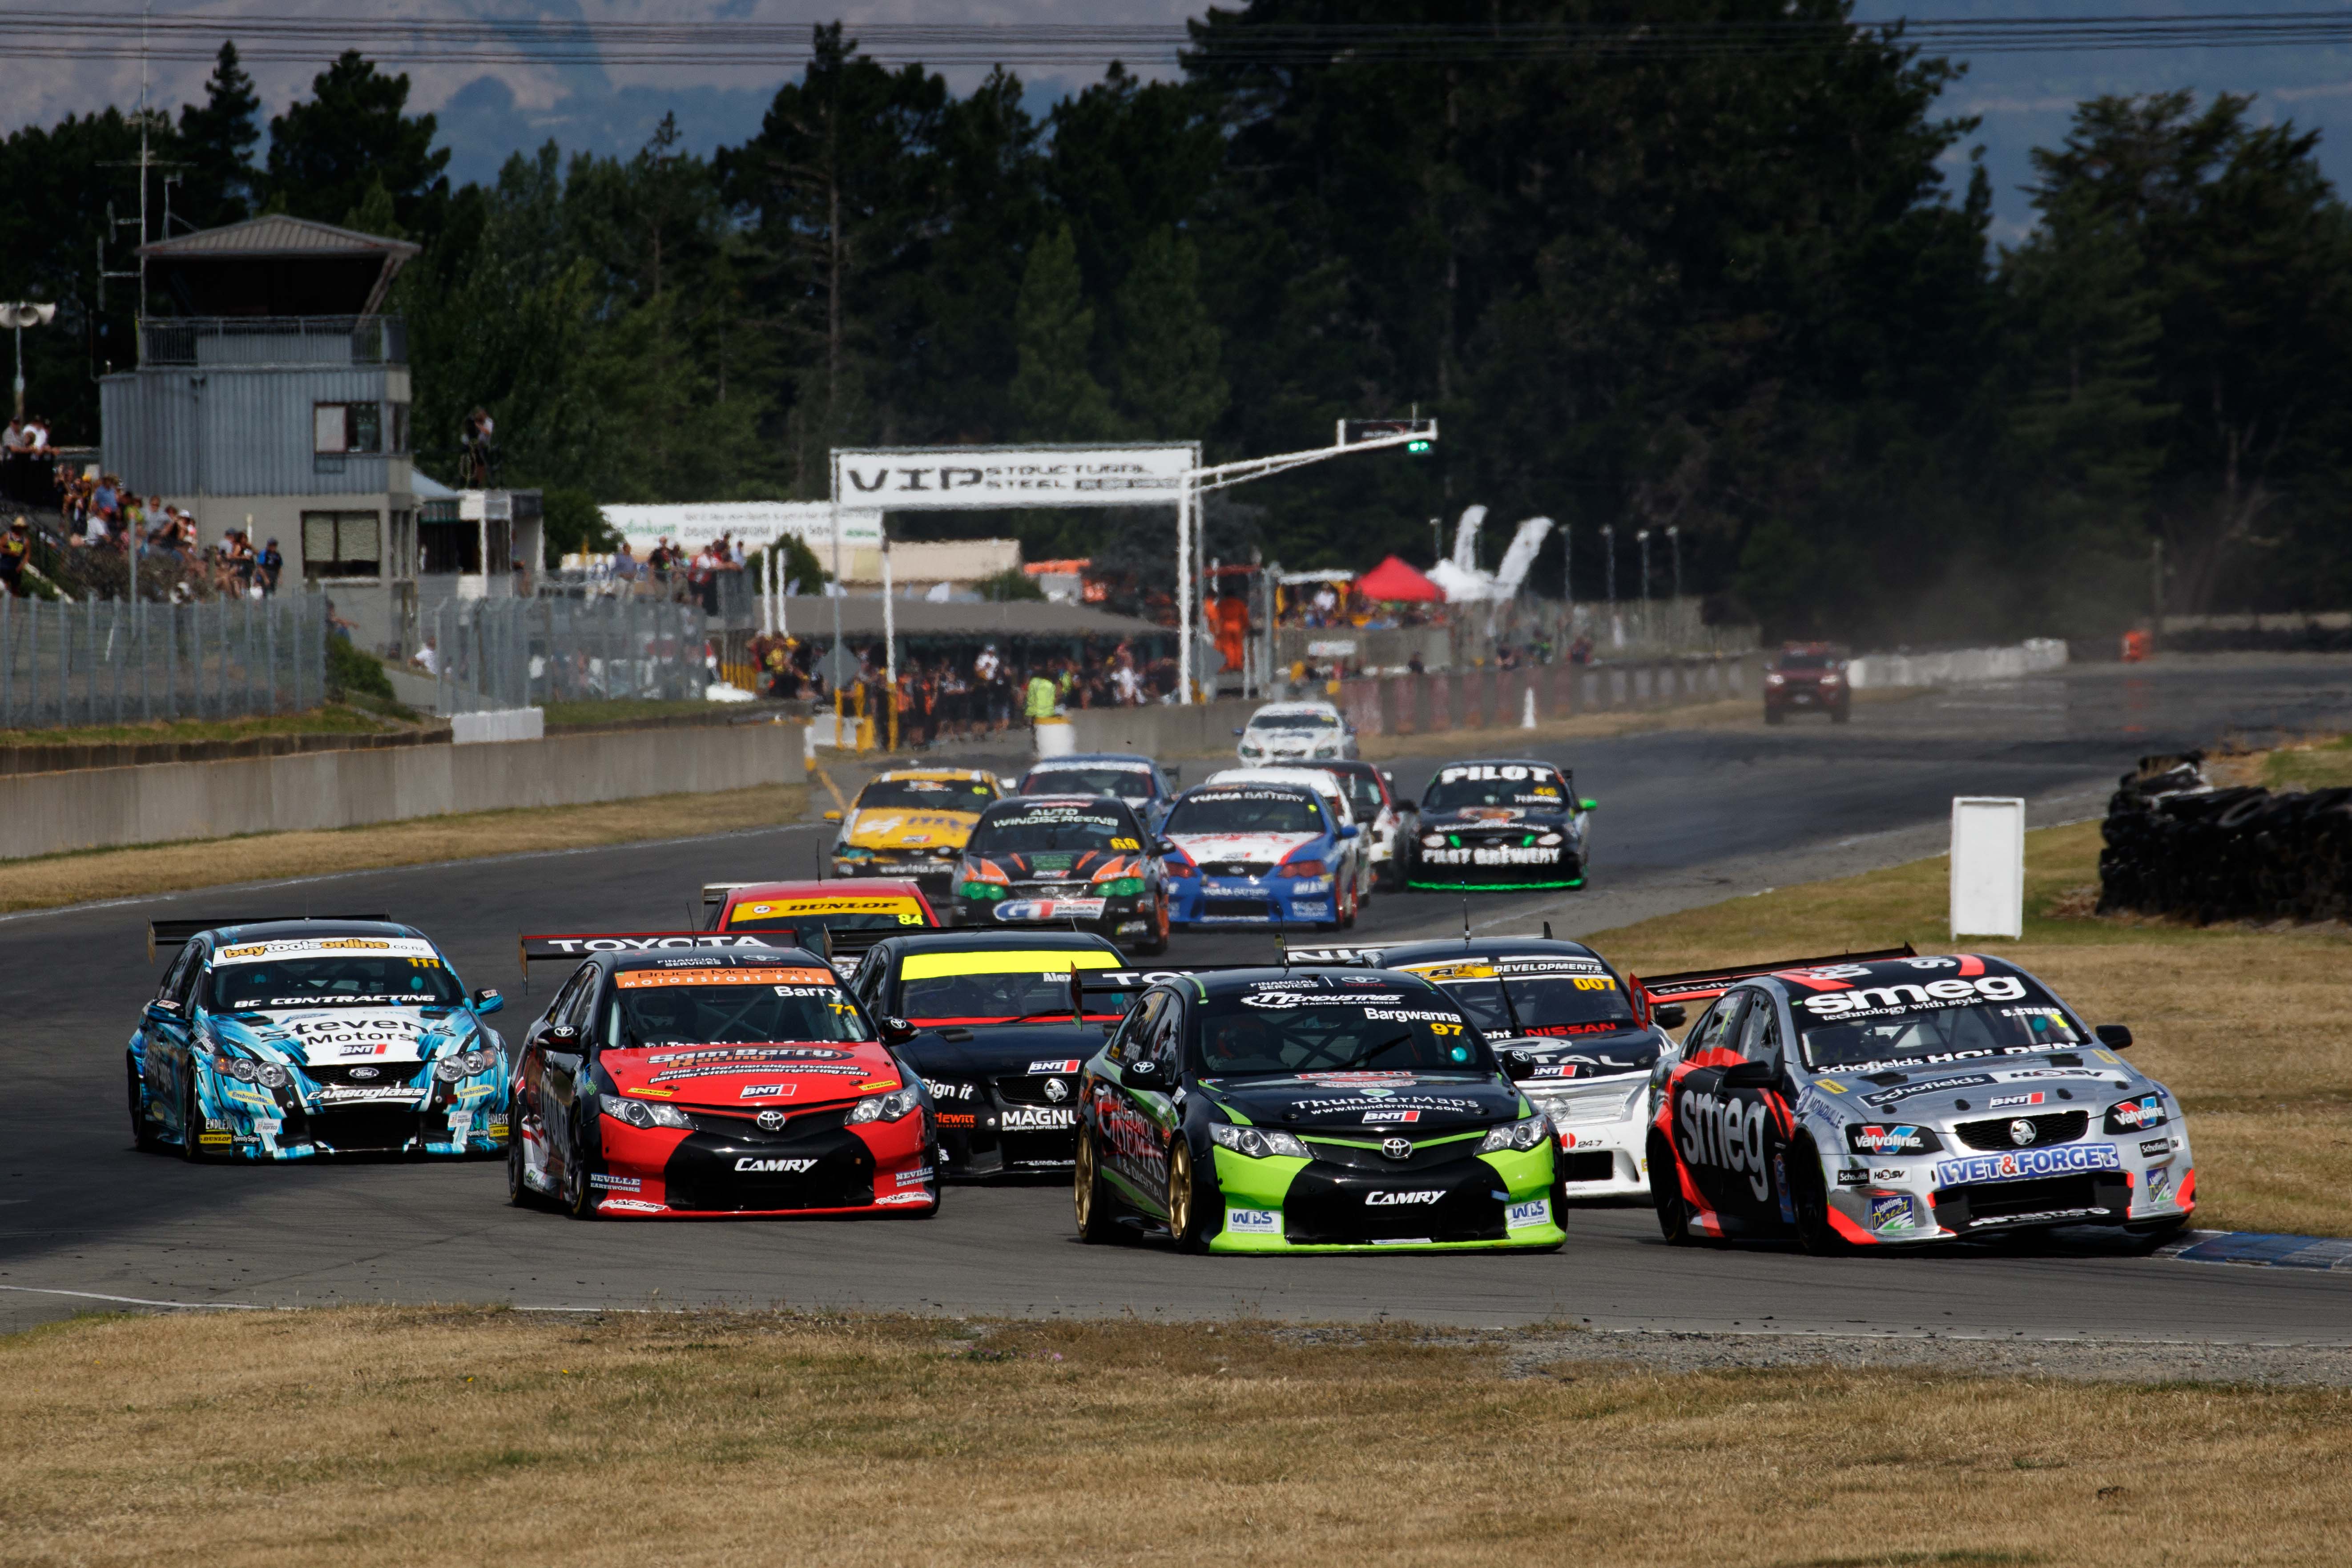 Evans Wins Opener at Ruapuna – Fierce Battle for Win in Class Two